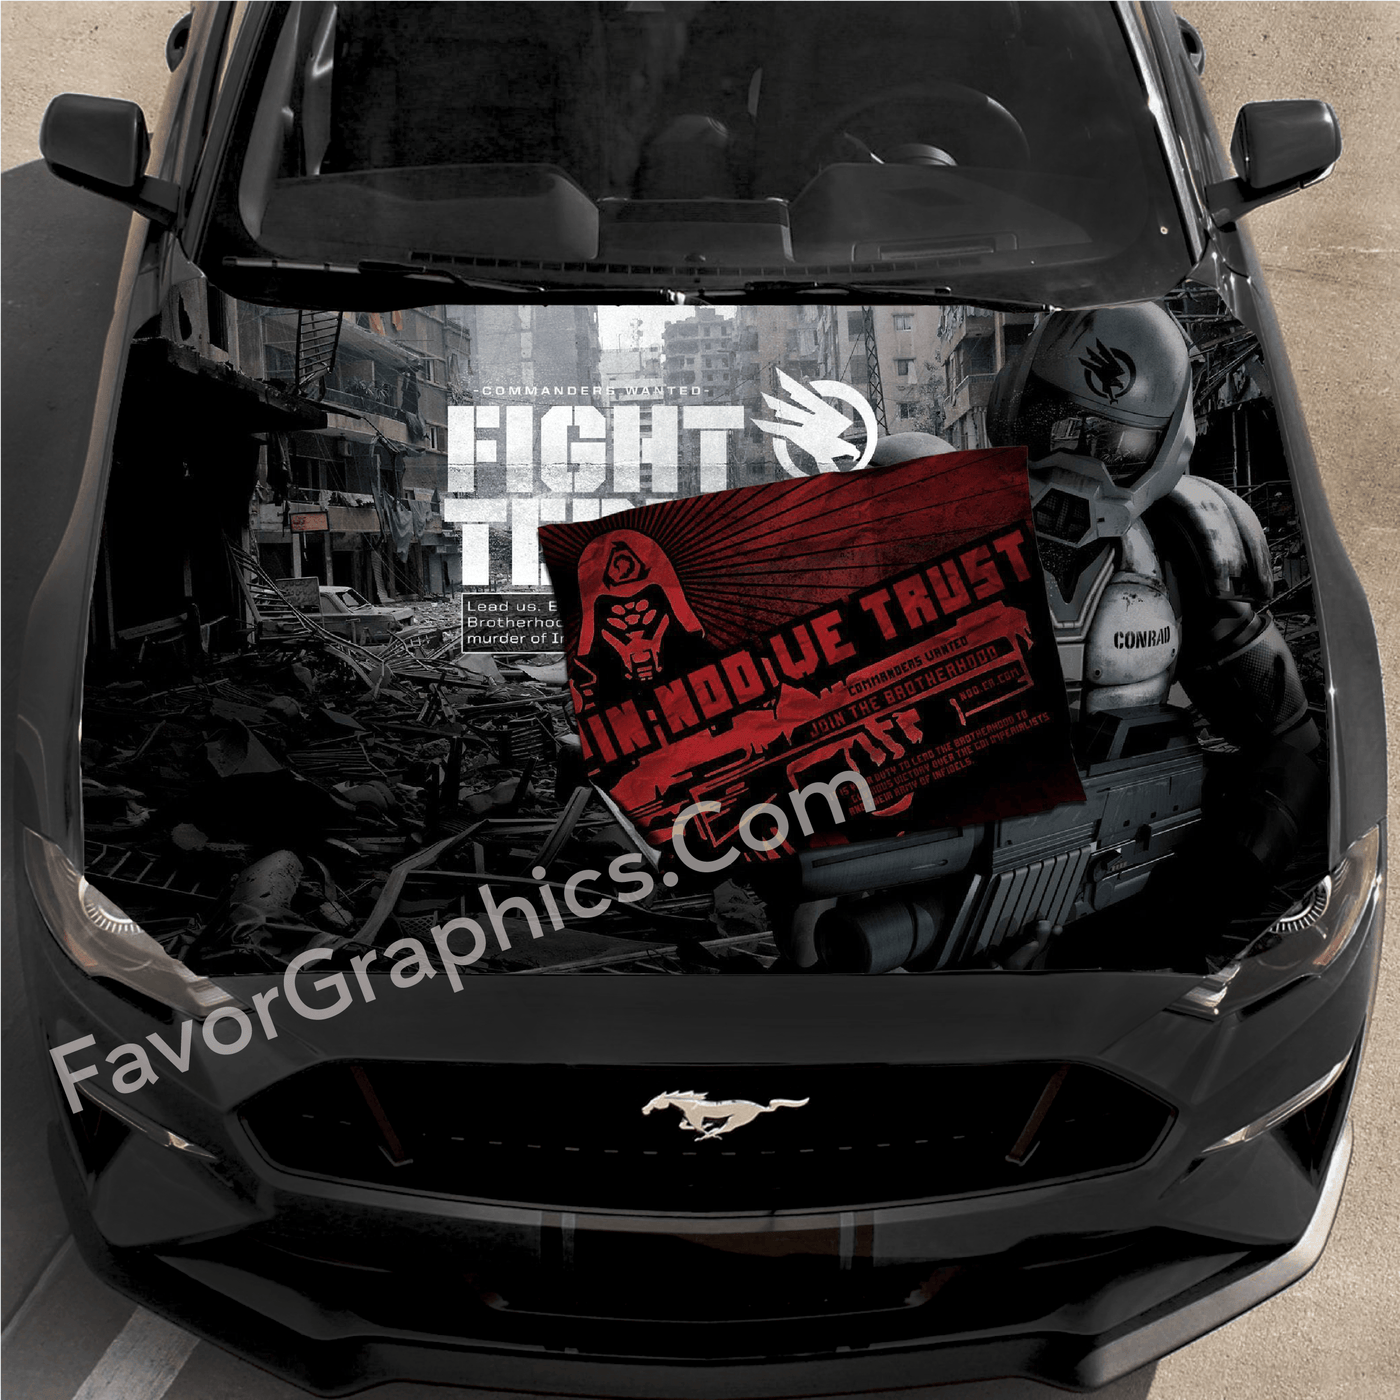 Command And Conquer Car Decal Sticker Vinyl Hood Wrap